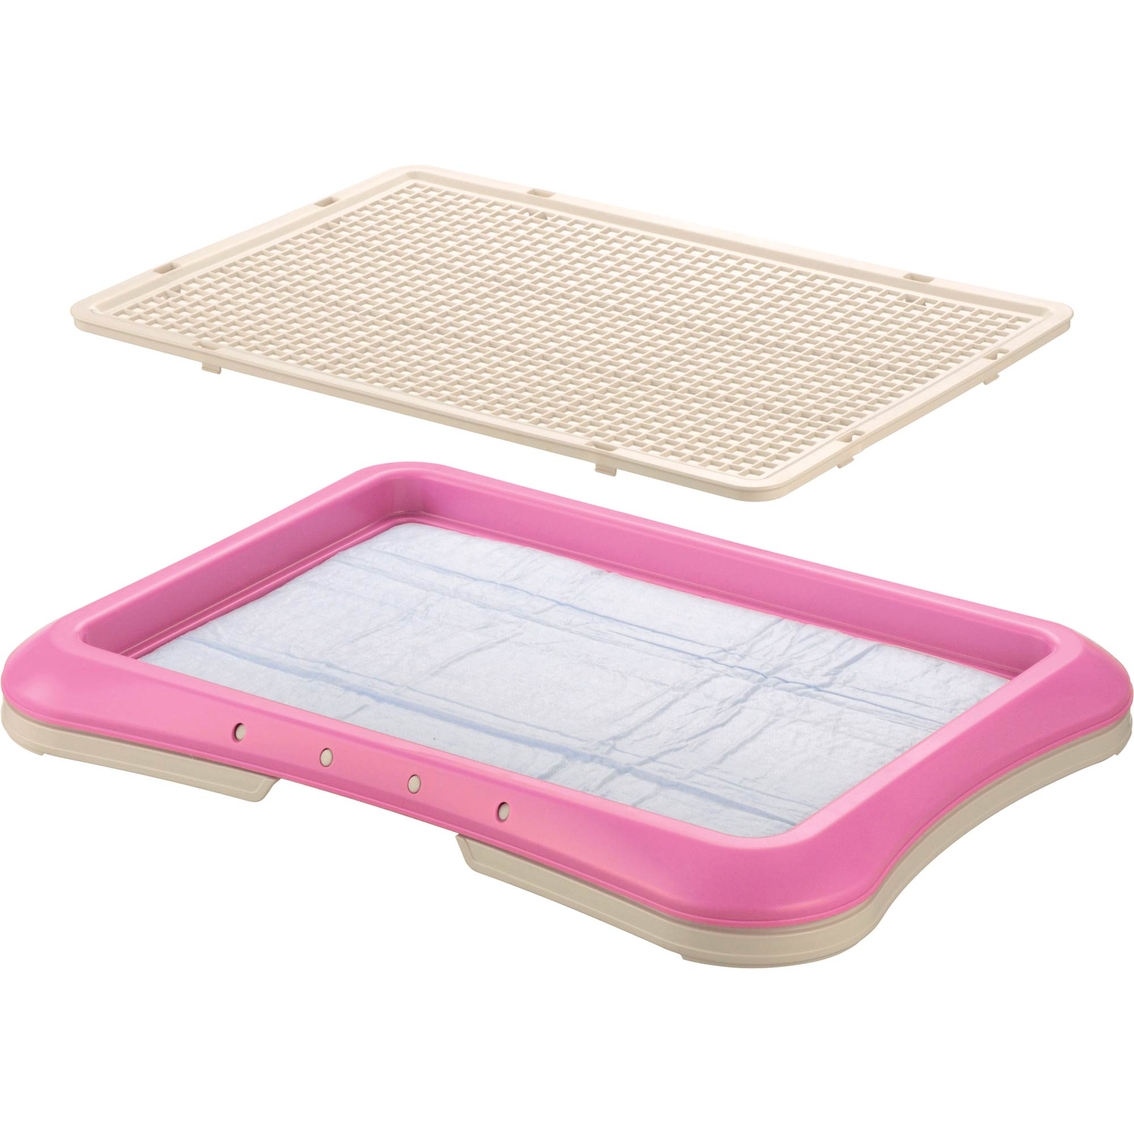 Richell Paw Trax Pink Mesh Training Tray - Image 4 of 4